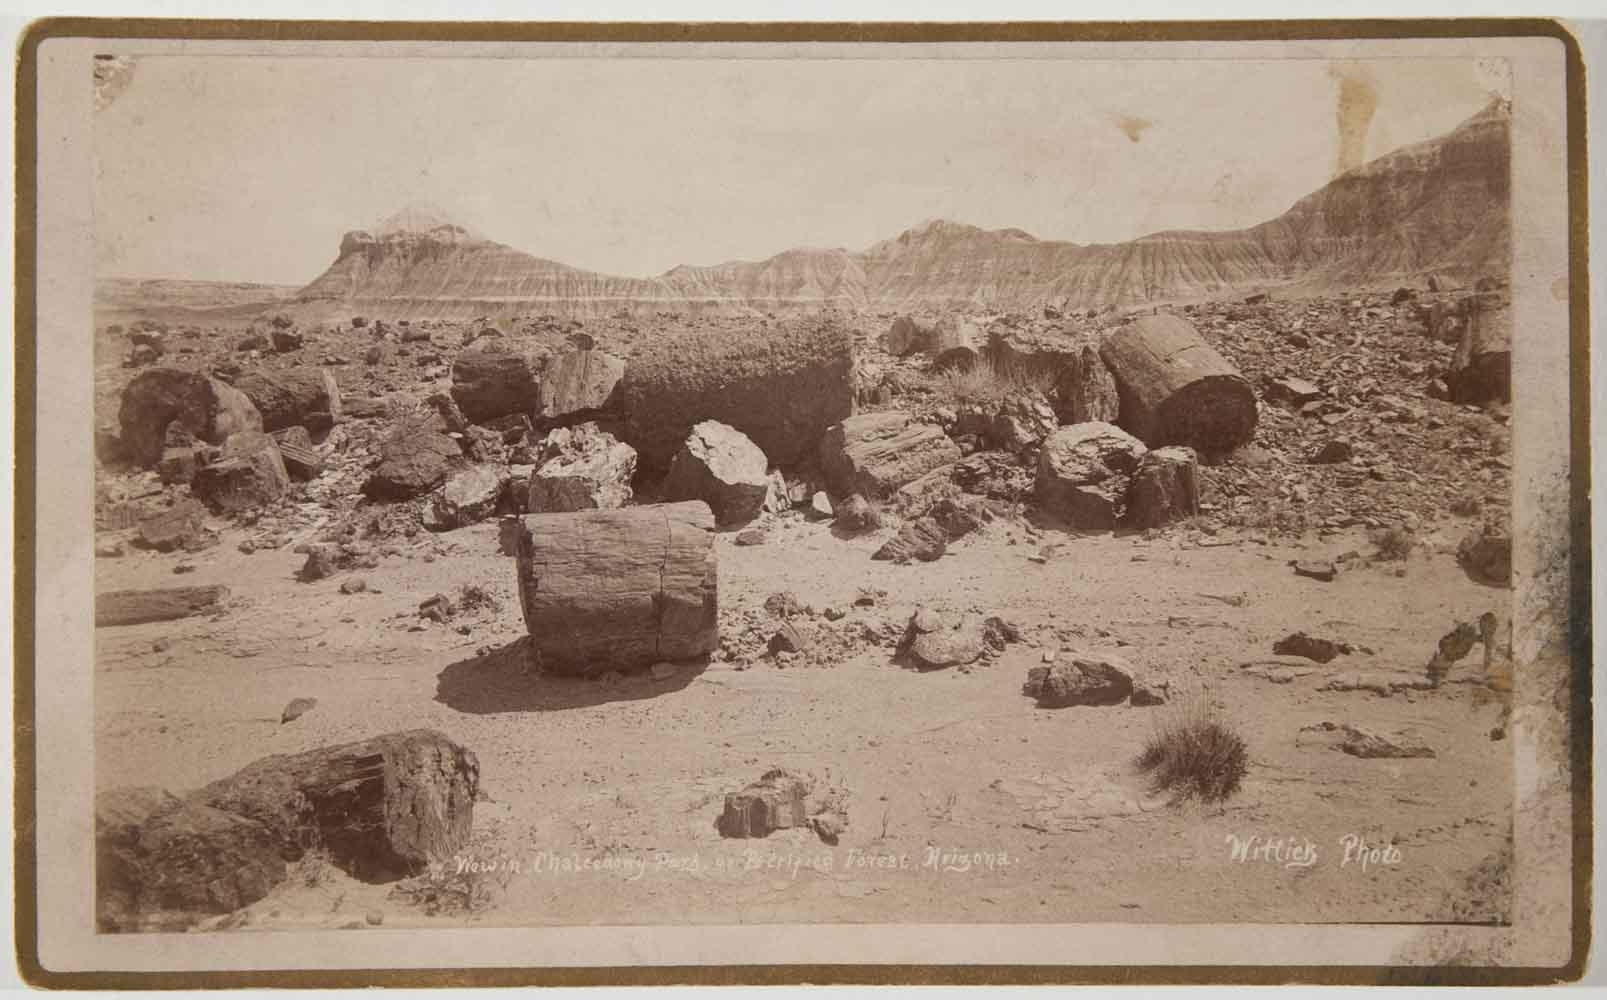 Ben Wittick (1845-1903) - View in Chalcedony Park, or Petrified Forest, Arizona